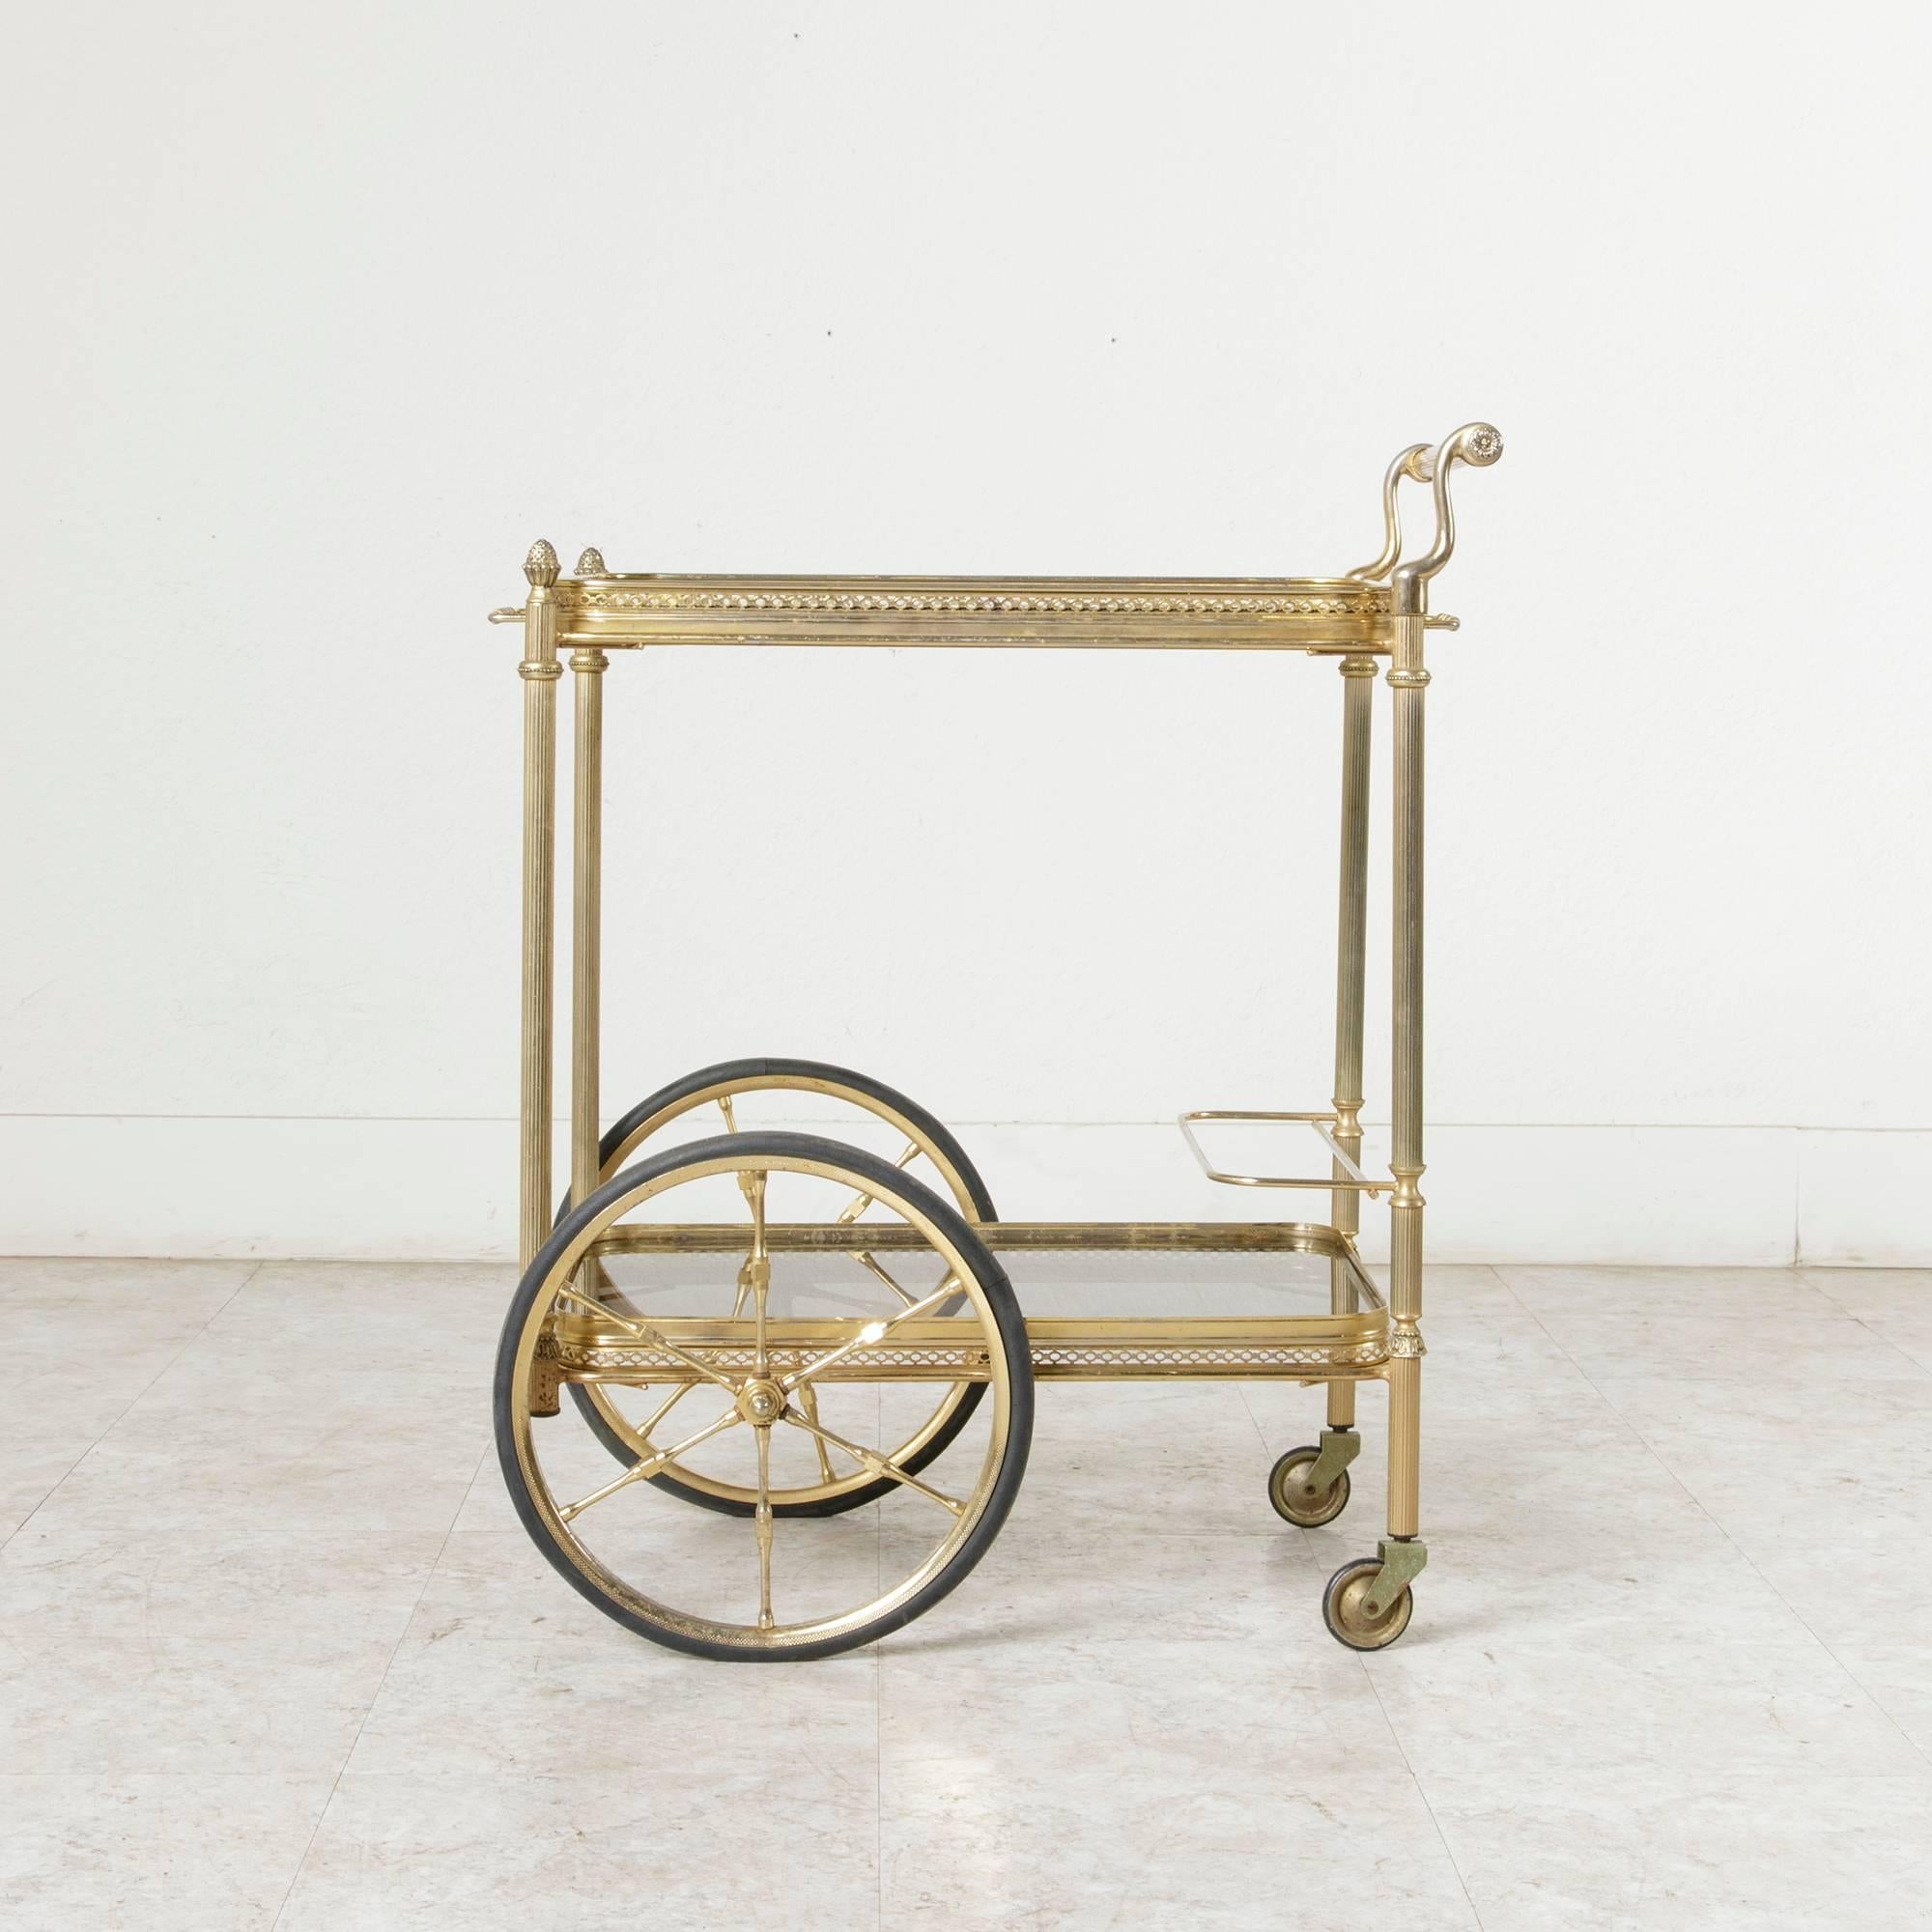 20th Century French Mid-Century Brass Bar Cart with Removable Glass Trays and Bottle Holder